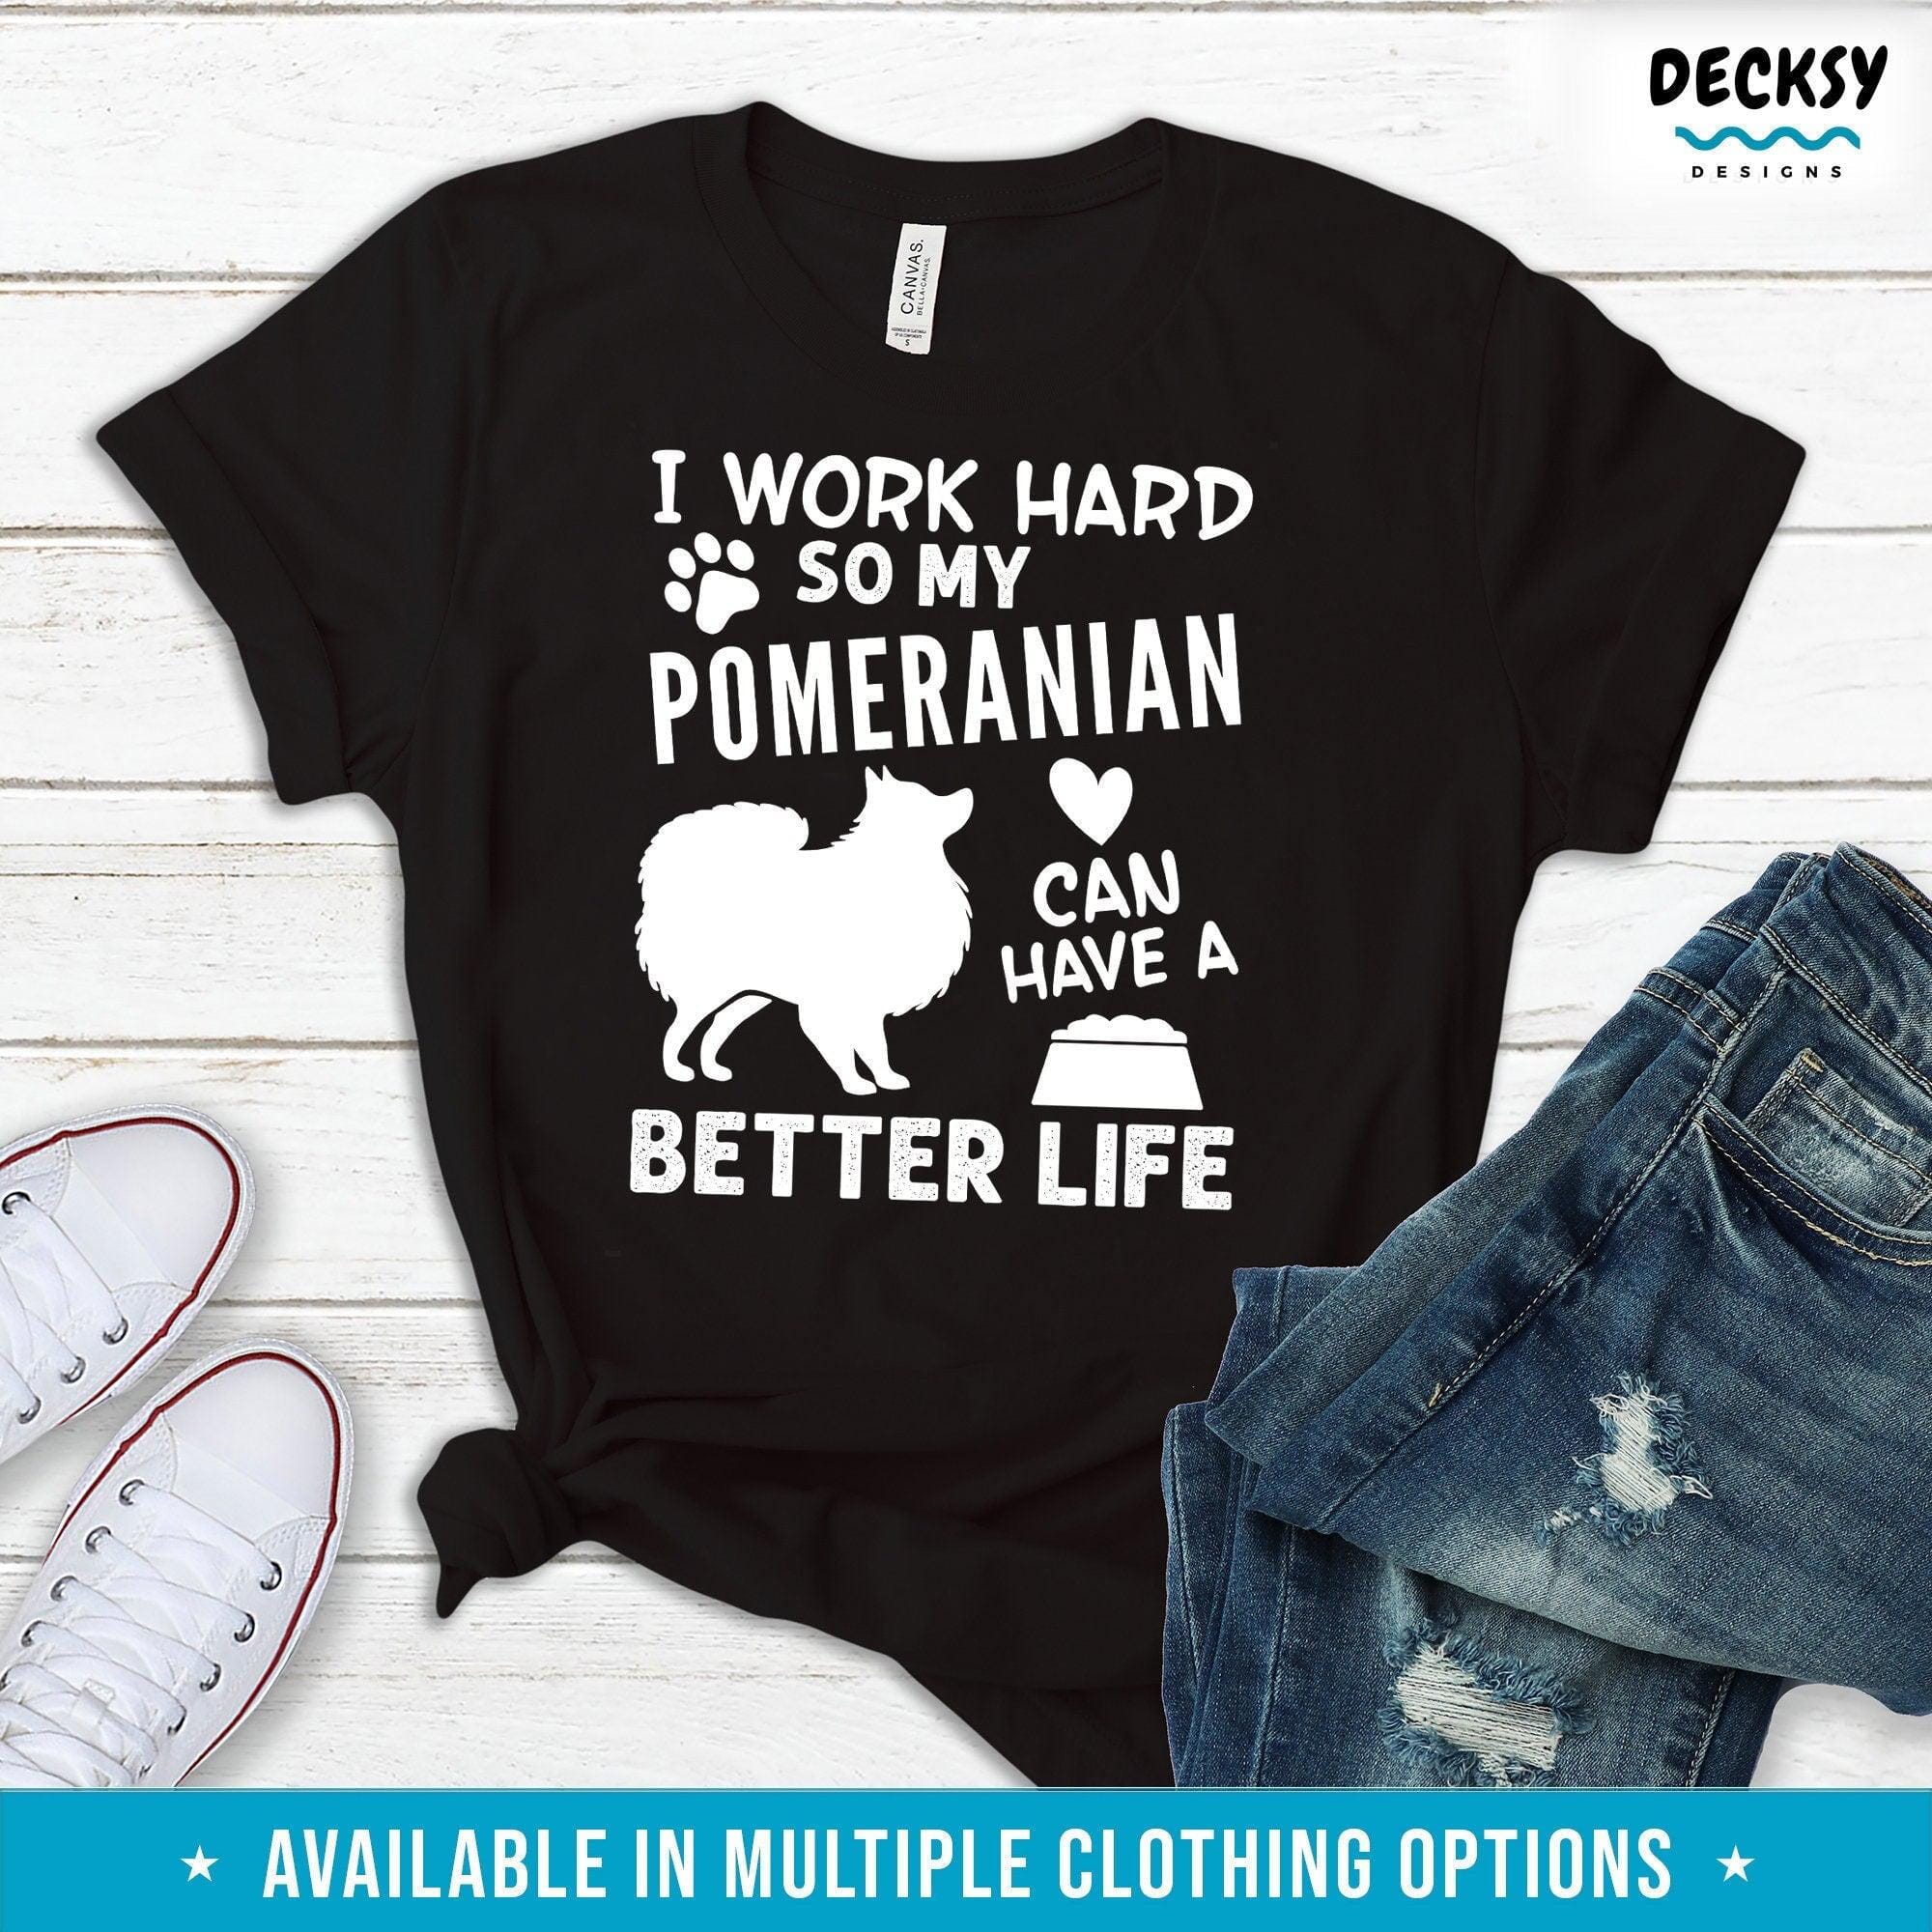 Pomeranian Dog Shirt, Gift For Dog Owner-Clothing:Gender-Neutral Adult Clothing:Tops & Tees:T-shirts:Graphic Tees-DecksyDesigns